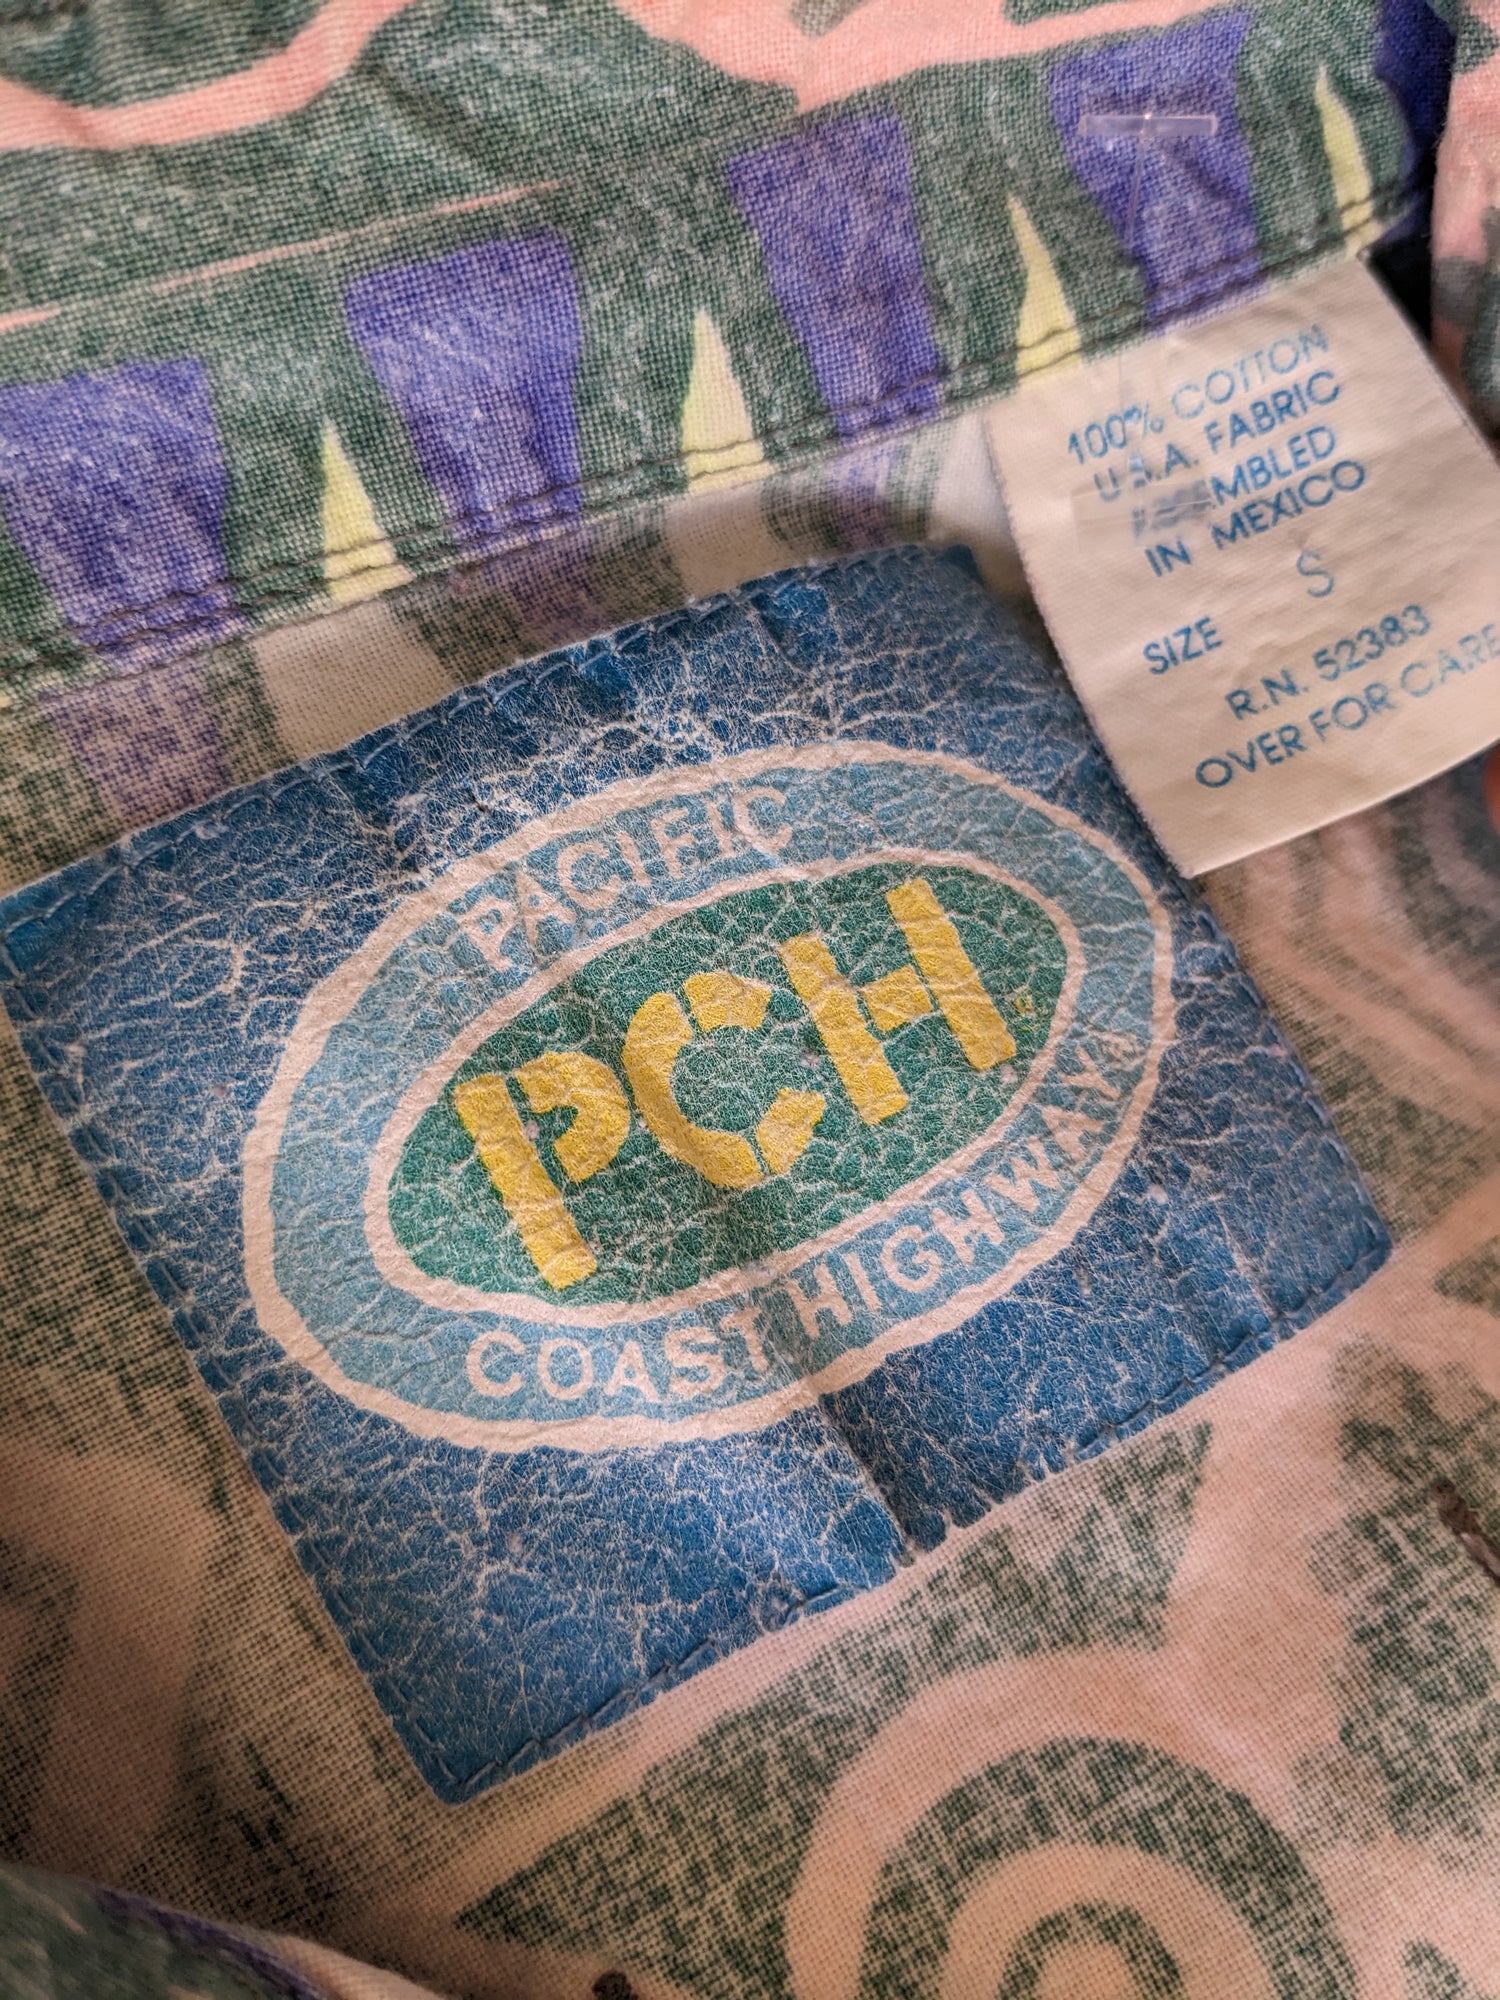 PCH button-up tag